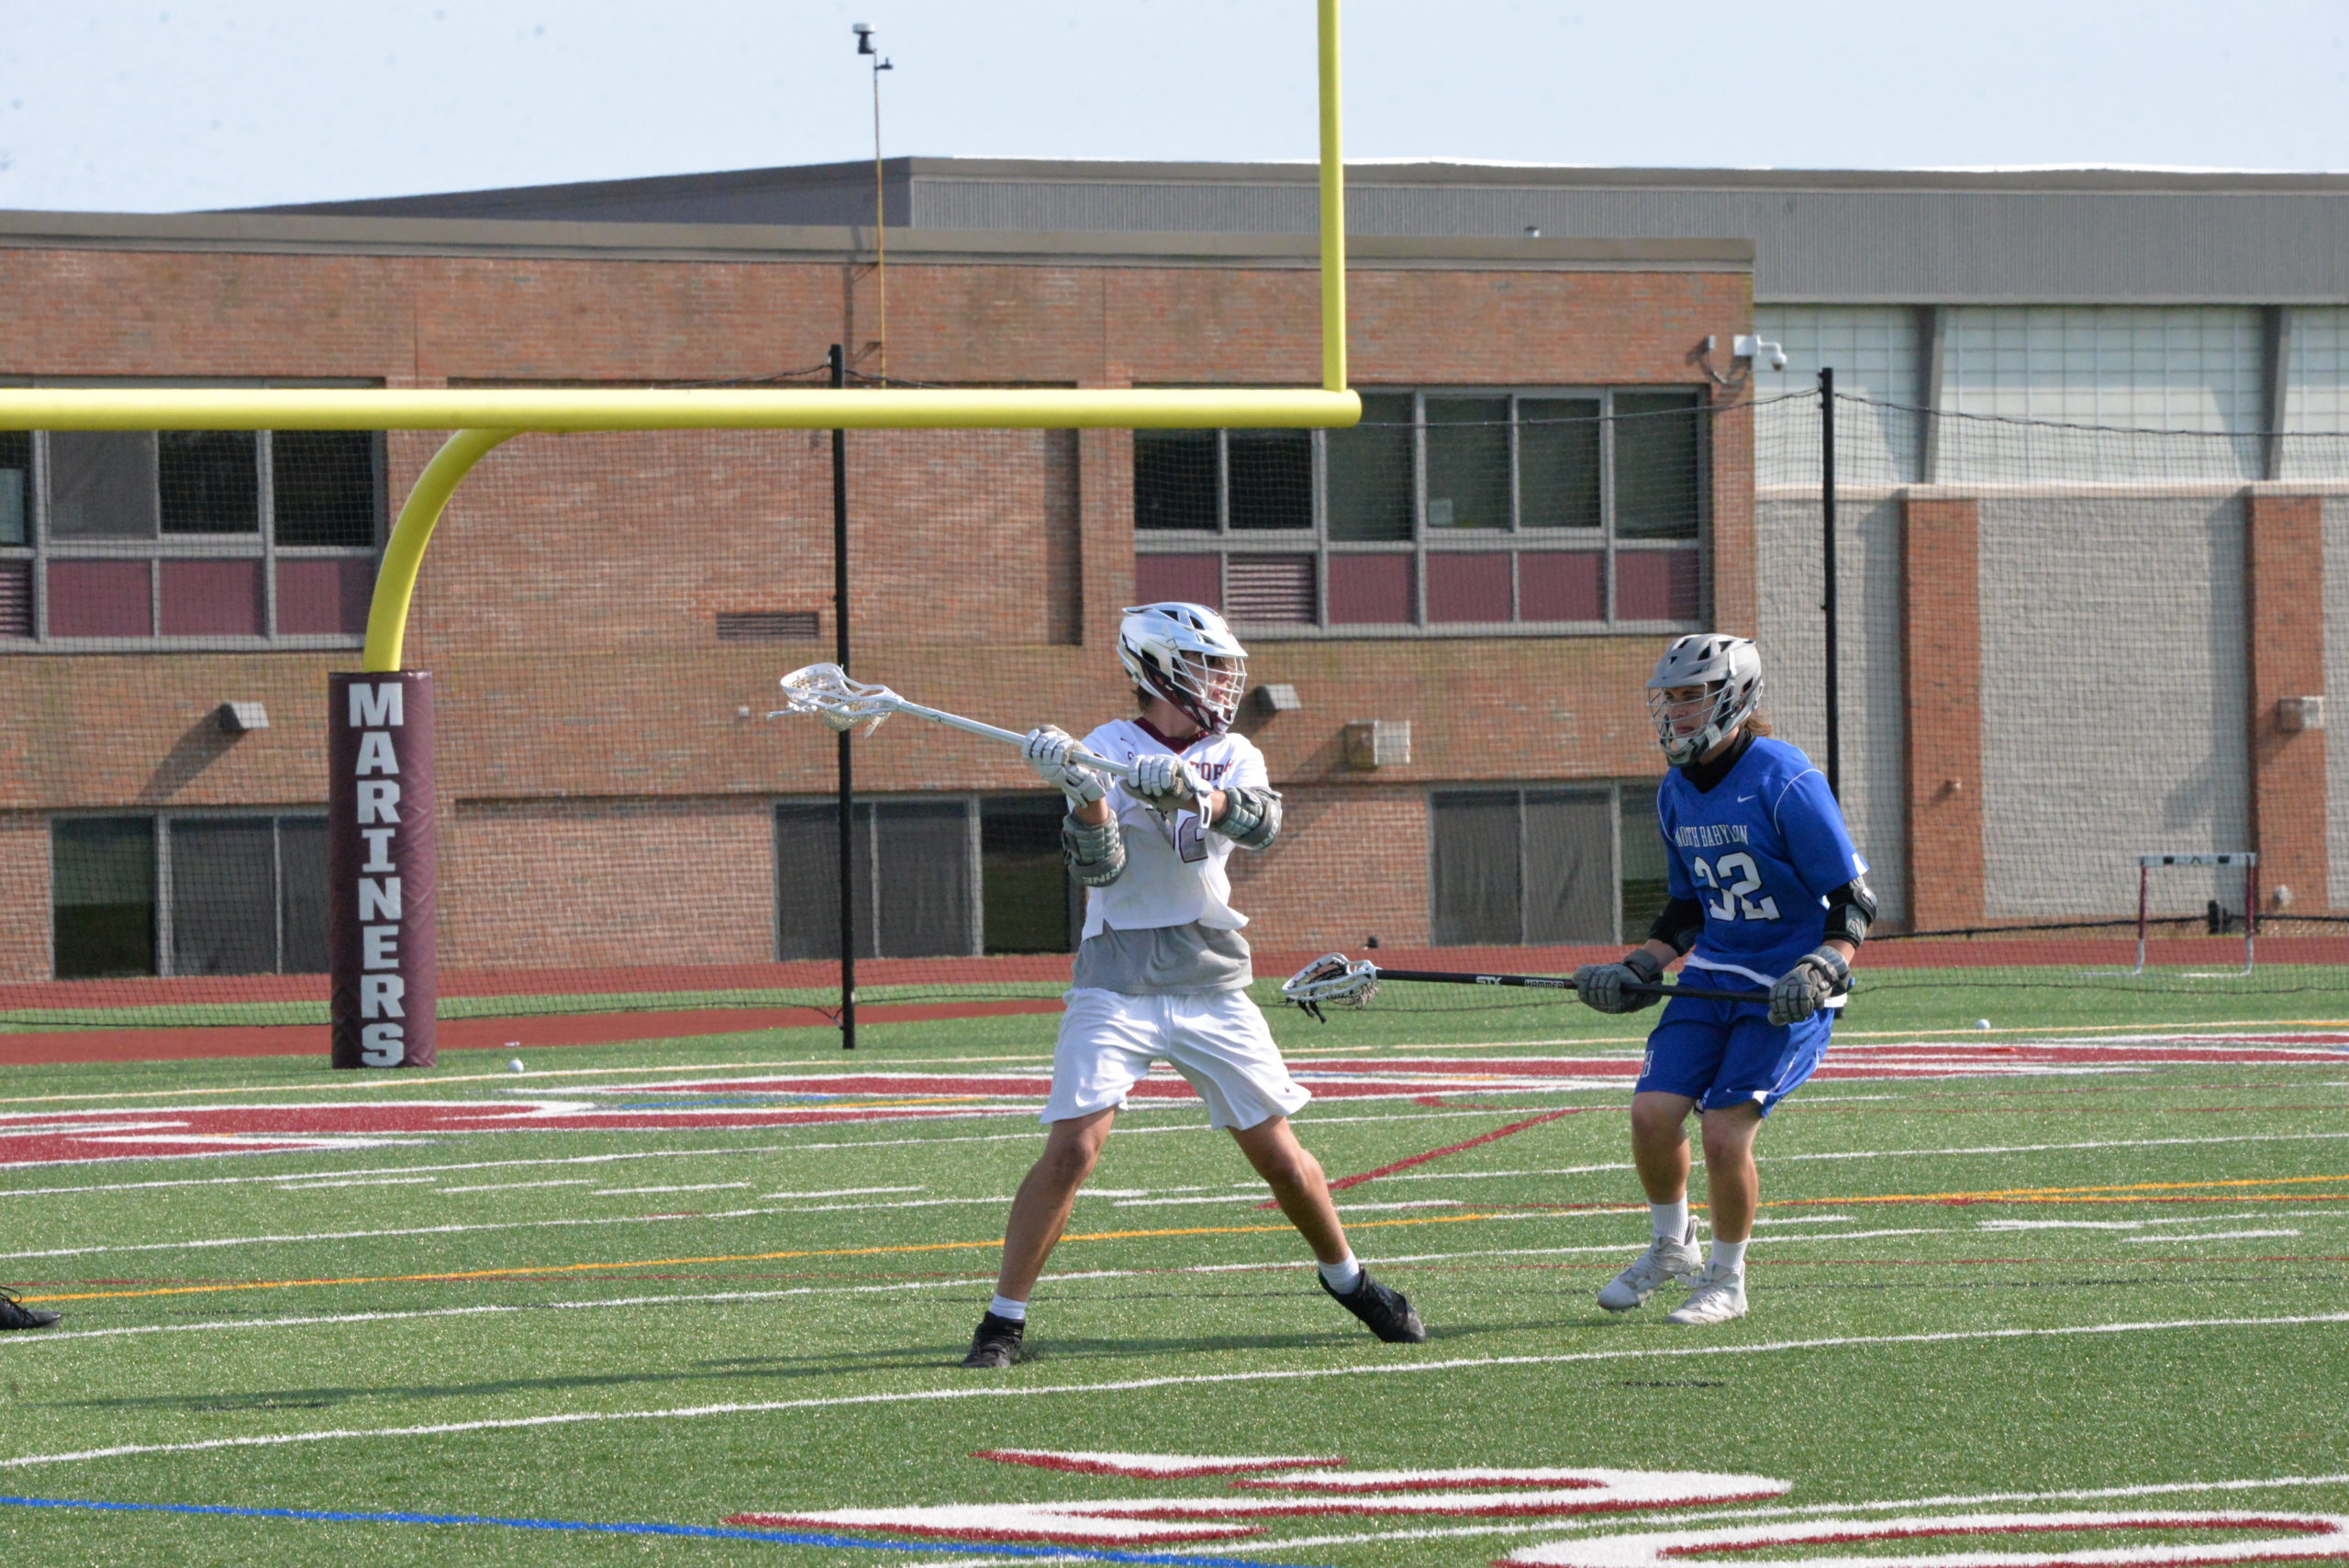 East Hampton's Jack Freel has stepped up a number of times this season for the South Fork boys lacrosse team.